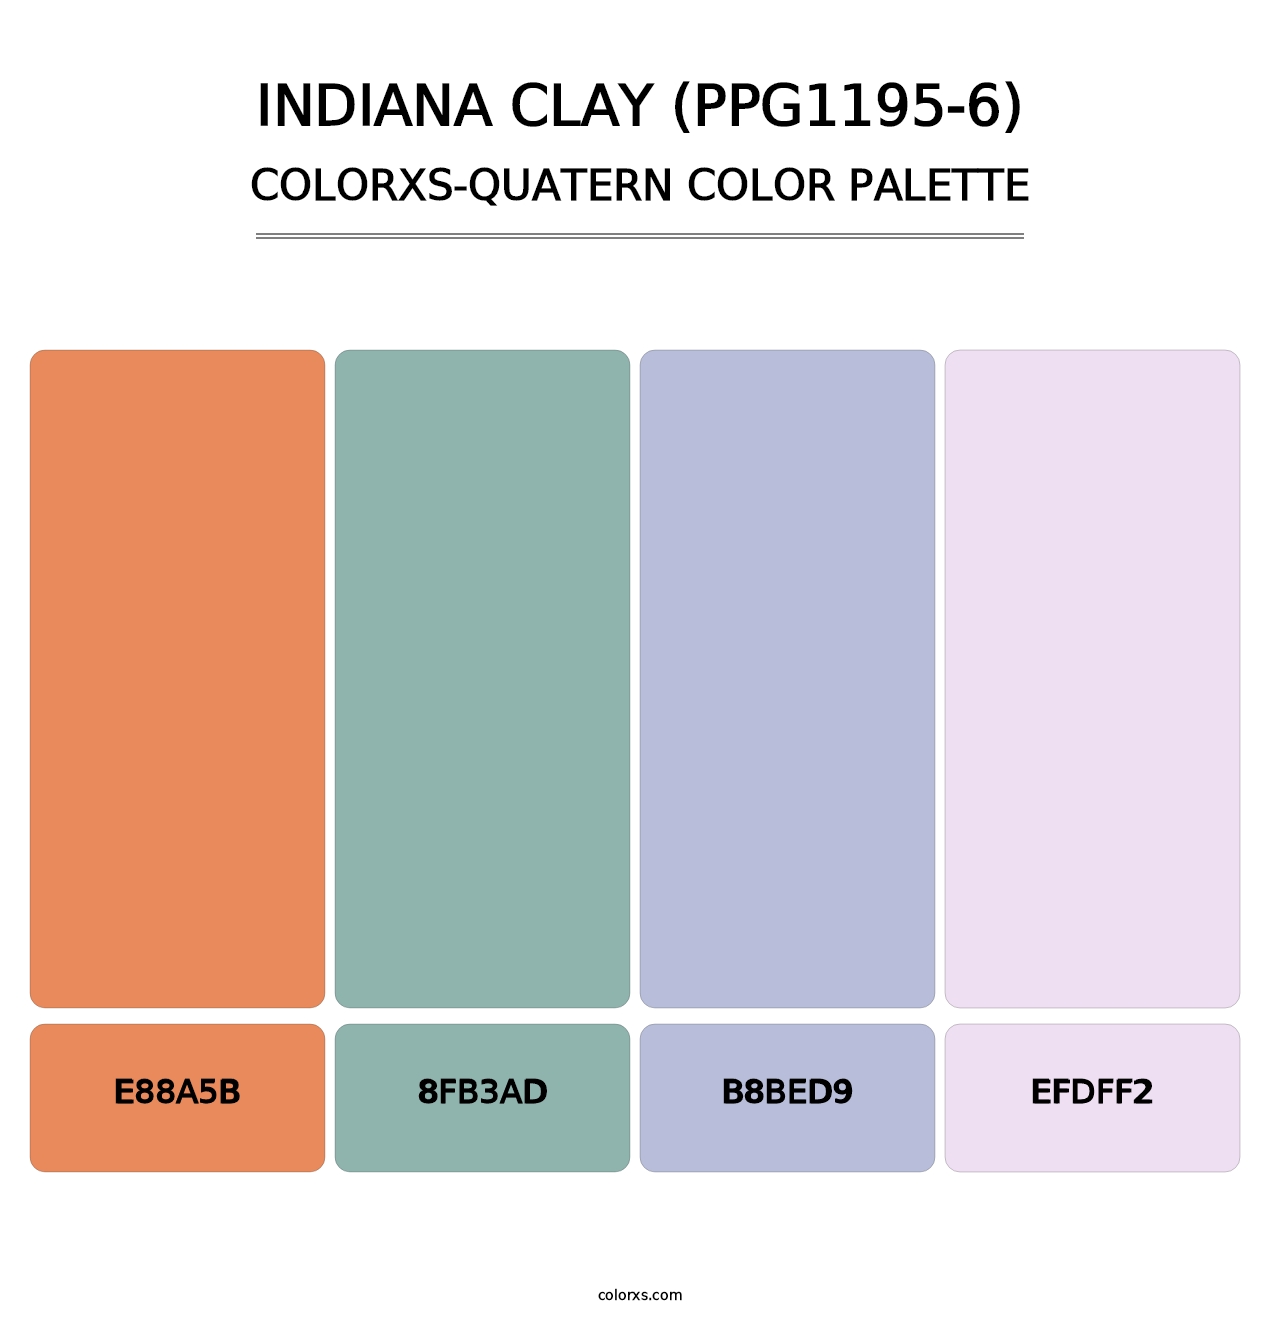 Indiana Clay (PPG1195-6) - Colorxs Quatern Palette